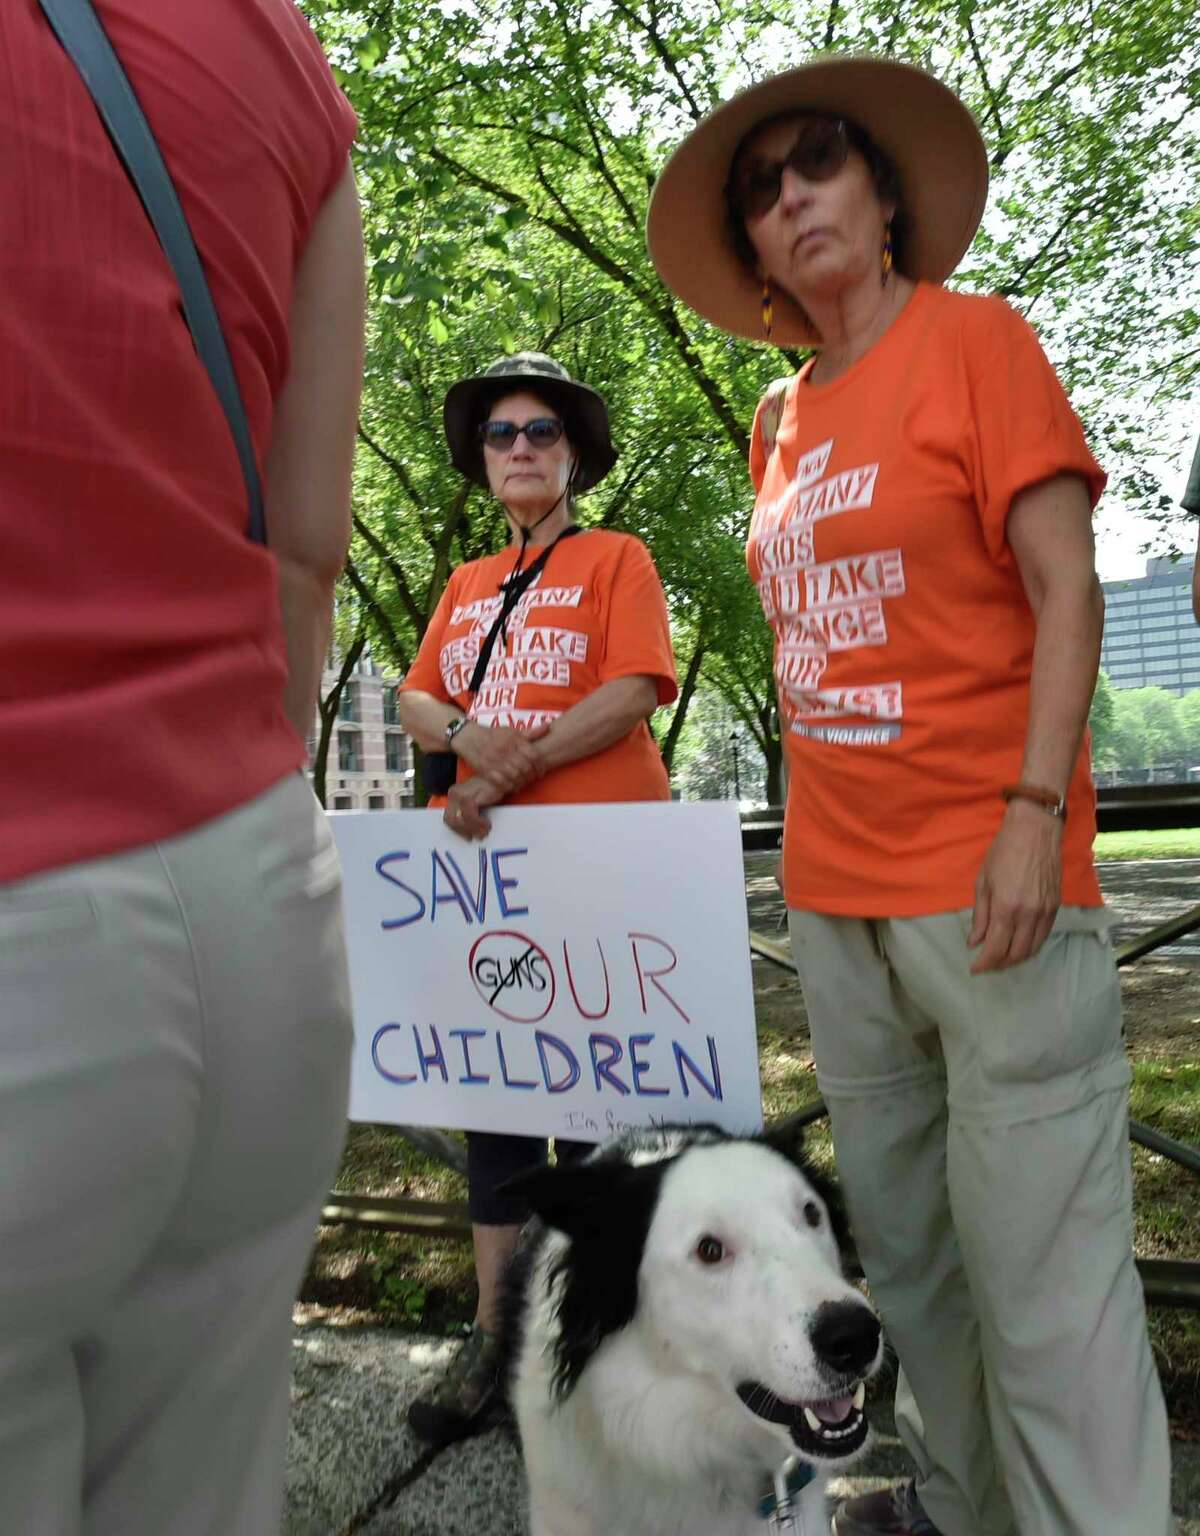 New Haven, Connecticut - Sunday, August 18, 2019: Volunteers with the Connecticut Chapters of Moms Demand Action for Gun Sense in America and Students Demand Action for Gun Sense in America activists, elected officials, and individuals affected by gun violence gather Sunday afternoon on the steps of the Courthouse on Elm Street and Church Street in New Haven Sunday to urge Senate Majority Leader Mitch McConnell to call the U.S. Senate back into session to take urgent action to pass universal background checks and a federal Red Flag Law.